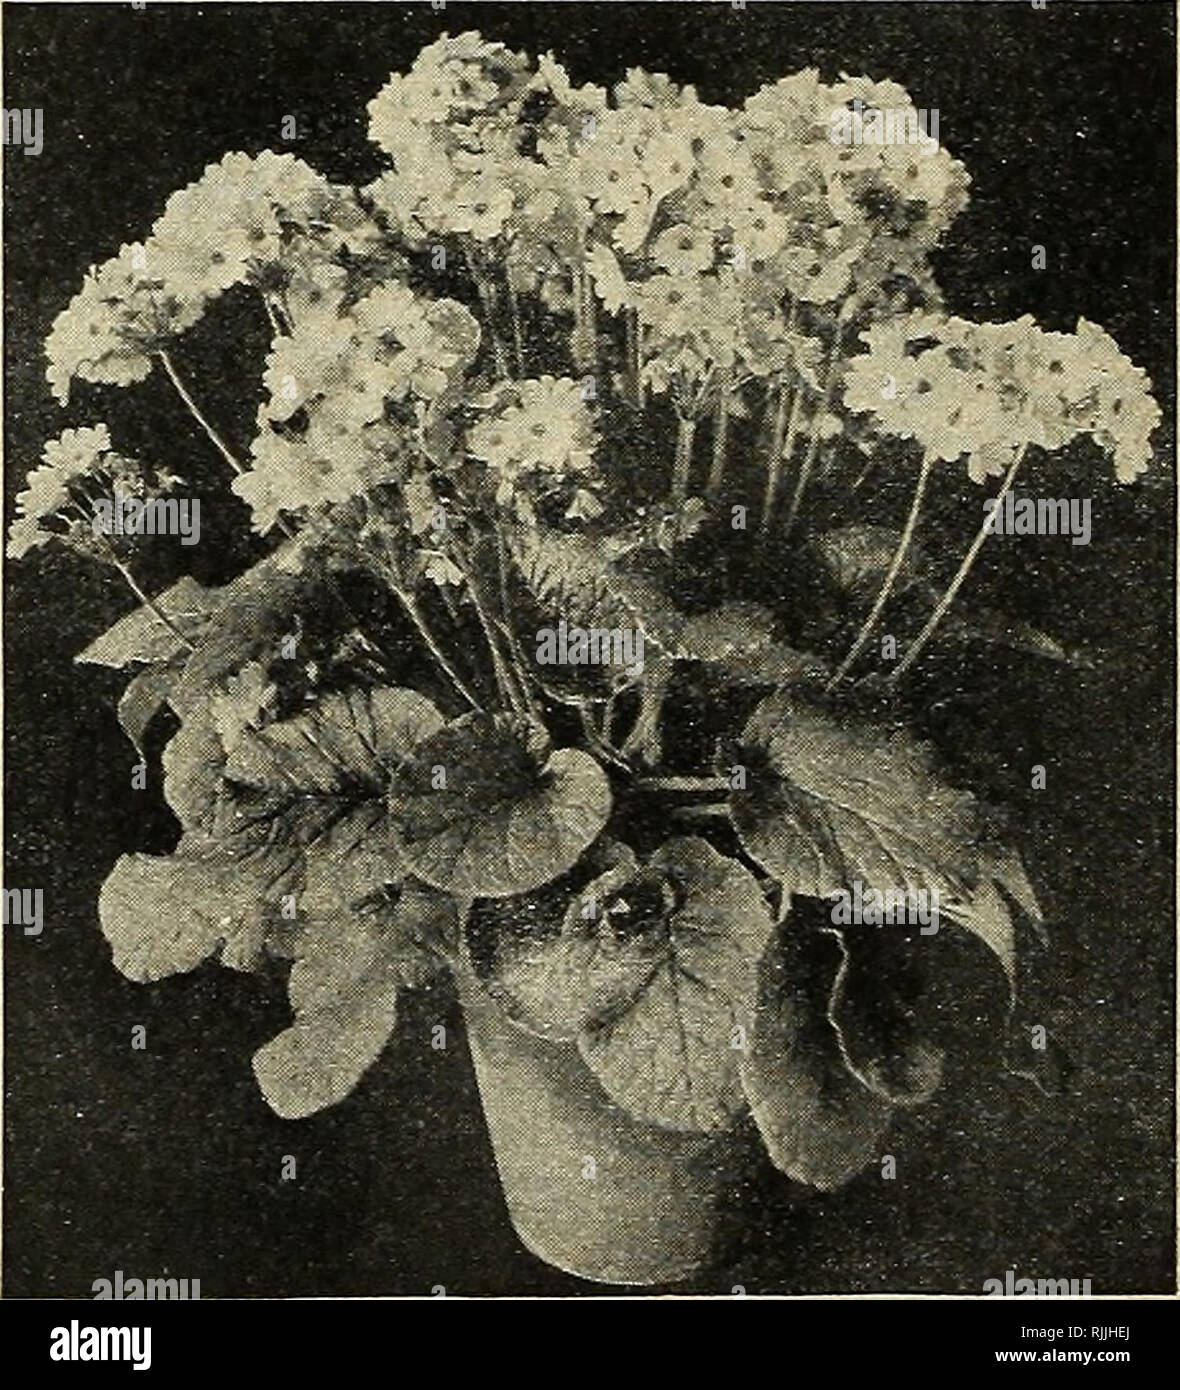 . Beckert's guide to better gardens : spring 1920. Nurseries (Horticulture) Pennsylvania Pittsburgh Catalogs; Nursery stock Pennsylvania Pittsburgh Catalogs; Flowers Seeds Pennsylvania Pittsburgh Catalogs; Bulbs (Plants) Pennsylvania Pittsburgh Catalogs; Gardening Pennsylvania Pittsburgh Equipment and supplies Catalogs. Primula sinensis, Giant Pink Half-hardy Primulas Useful for pot culture or for rock- eries and borders. While hardy under favorable conditions of soil and moisture, it is prudent to protect them over winter, particularly against saturation of soil by water. 1985 Auricula. Vigor Stock Photo